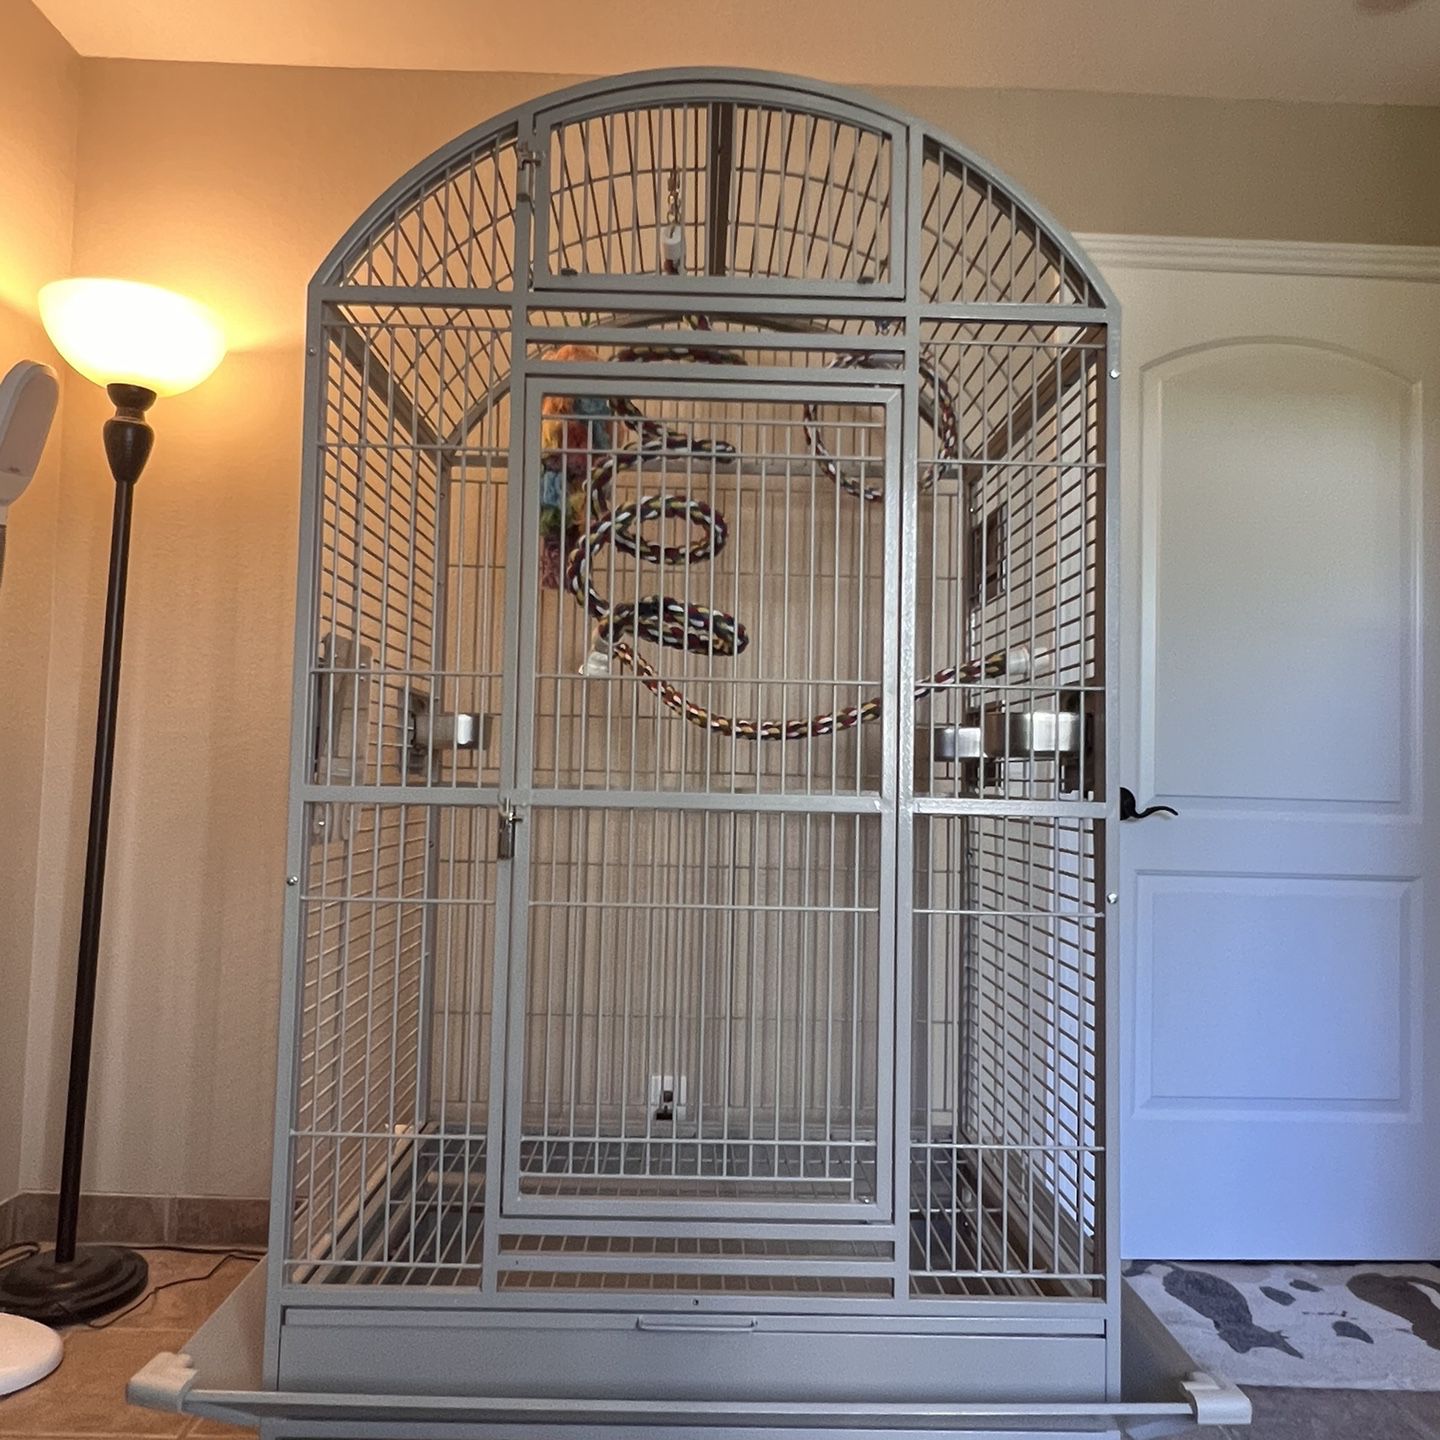 King’s Cages Bird Cage 73” Tall With veranda